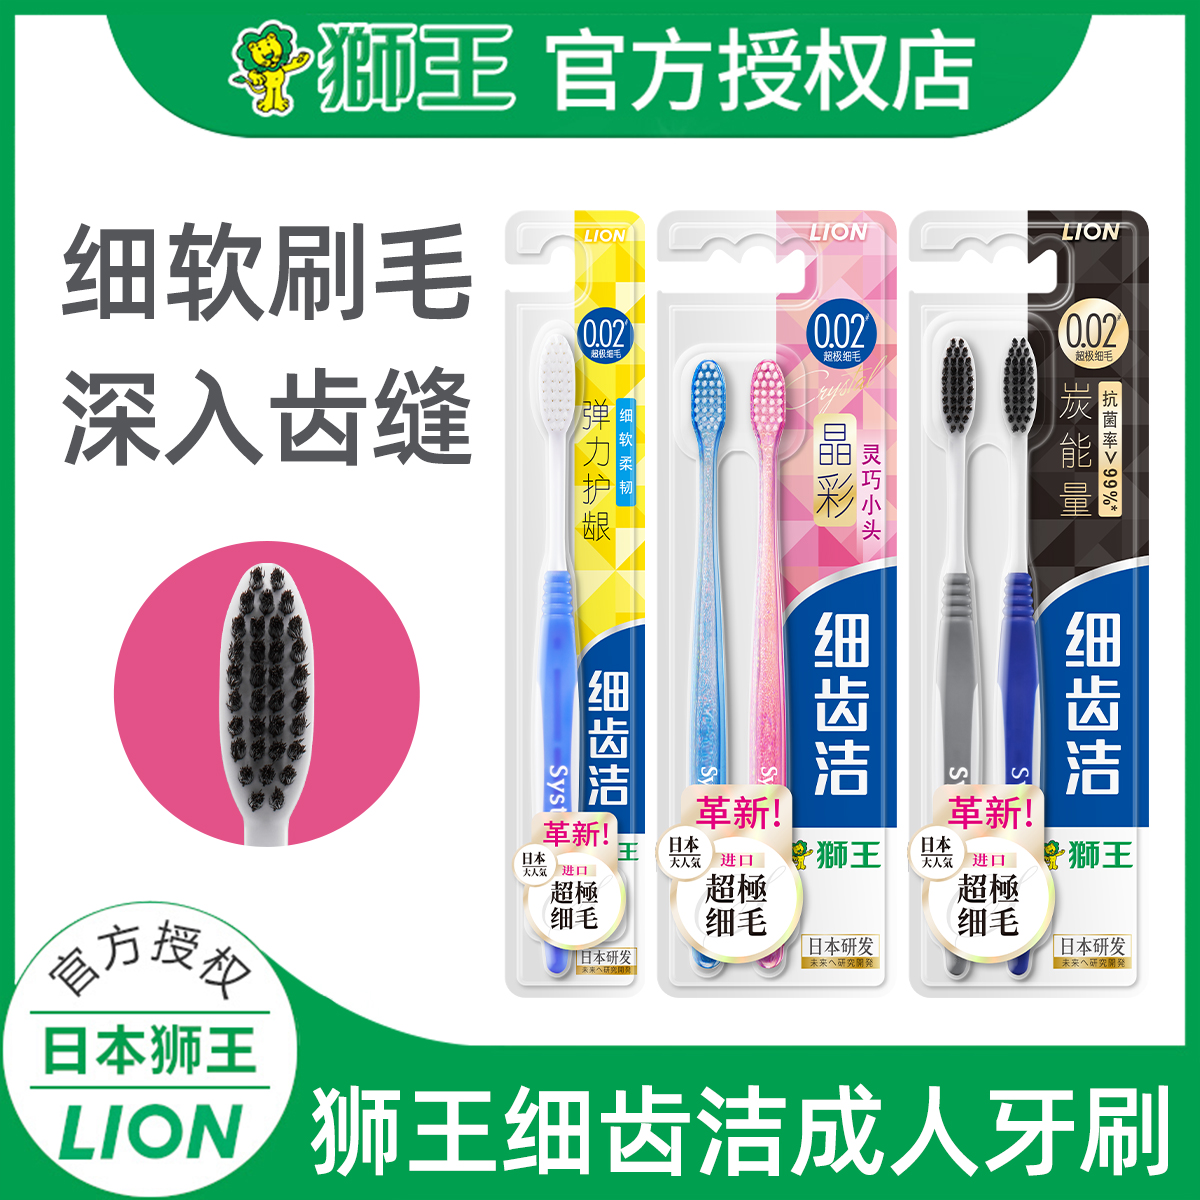 Lion King toothbrush soft hair lion fine tooth cleaning elastic gum toothbrush adult men and girls fine hair confinement interdental brush